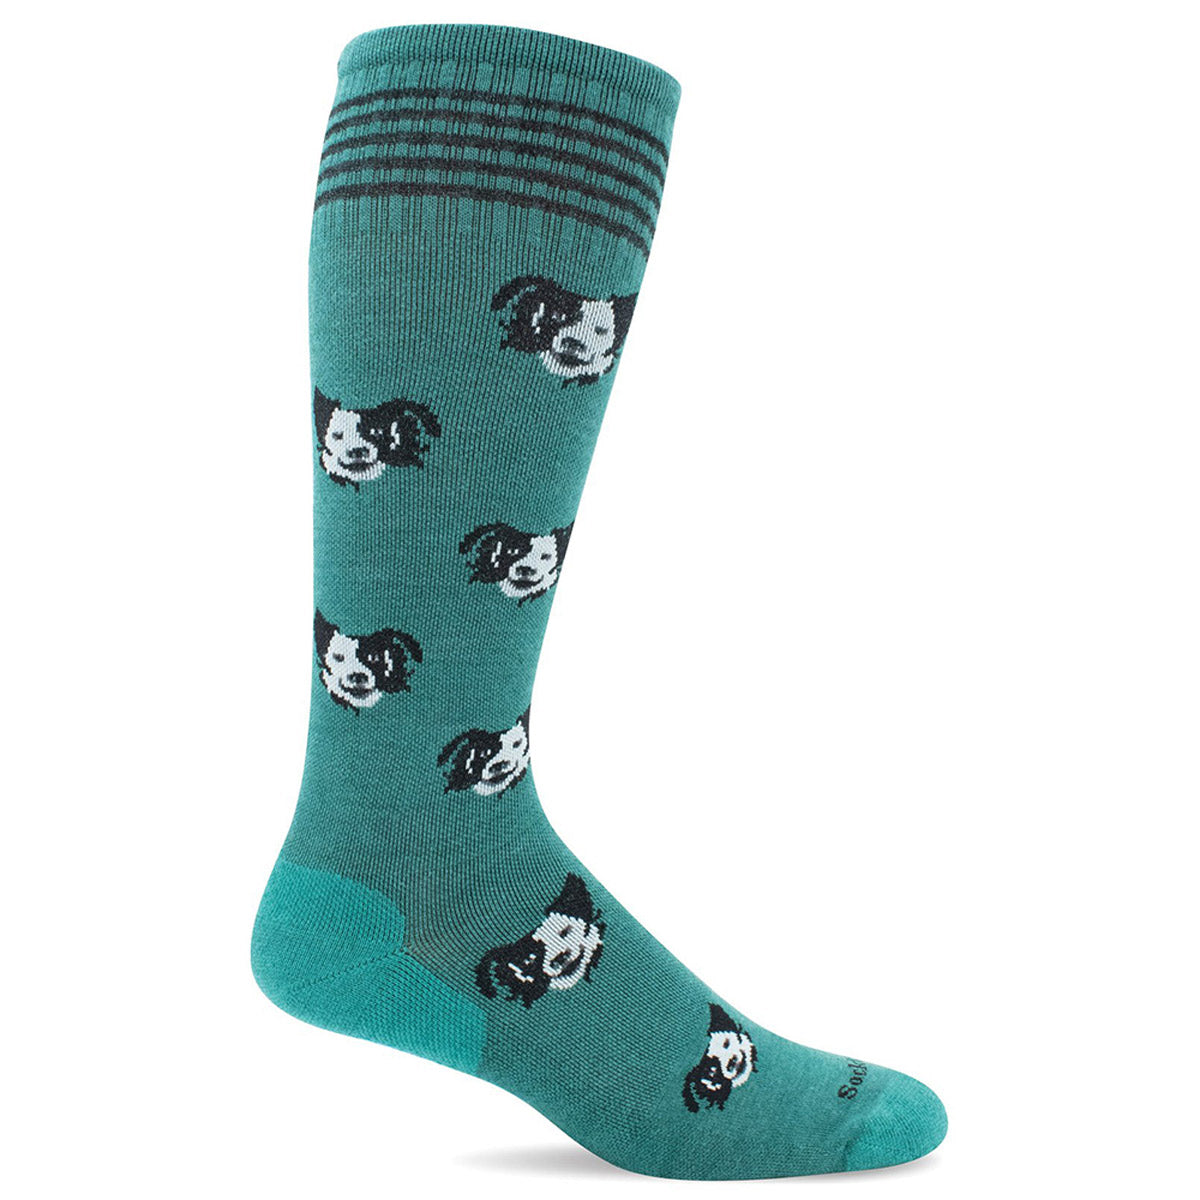 A teal compression sock with a pattern of panda faces and striped detailing on the leg, featuring arch support, featuring the SOCKWELL CANINE CUDDLE JADE 15 20 MMHG COMPRESSION SOCKS for women by Sockwell.